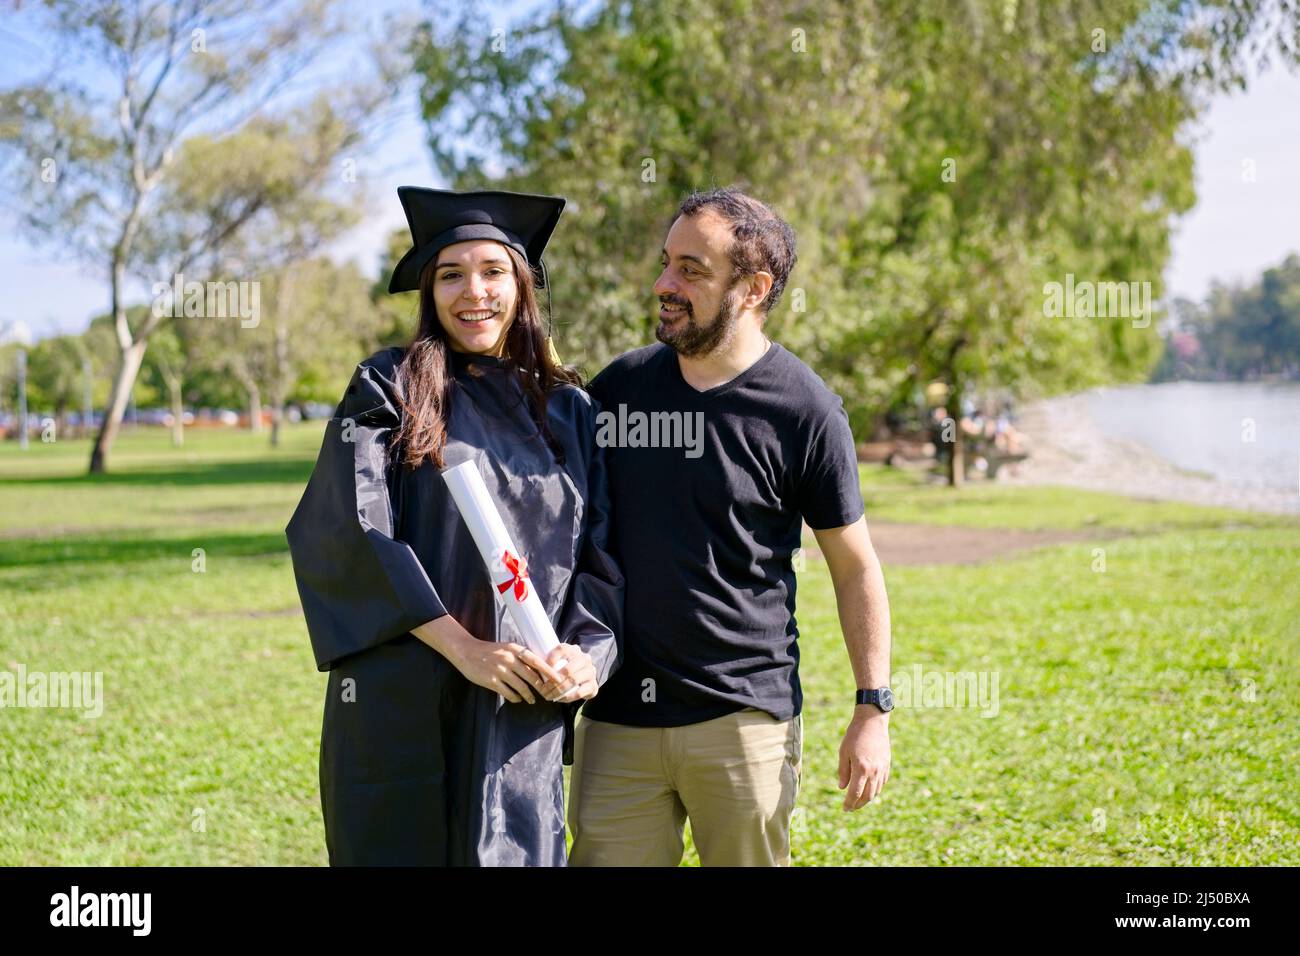 Young girl recently graduated, dressed in cap and gown, with her degree in her hands, celebrating with her family on the university campus. Very happy Stock Photo